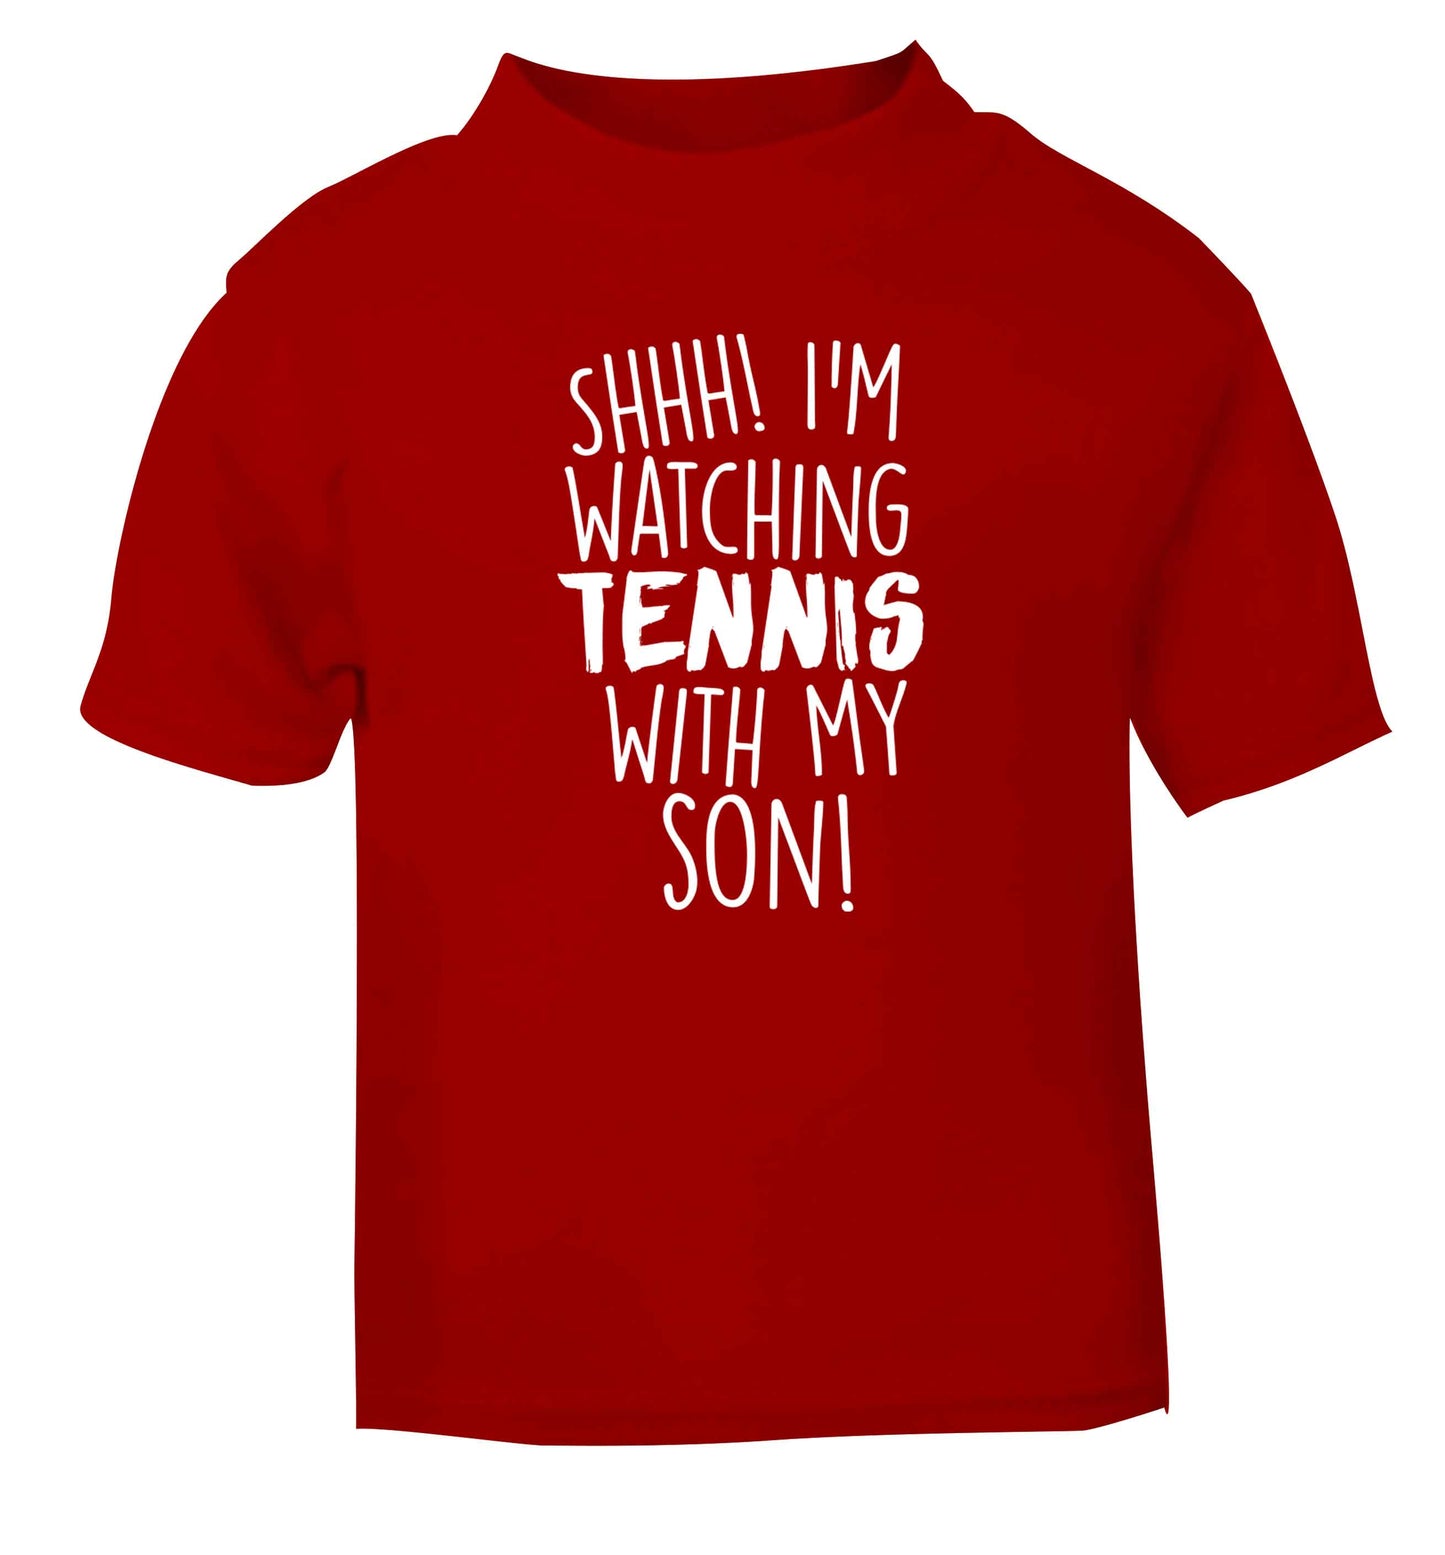 Shh! I'm watching tennis with my son! red Baby Toddler Tshirt 2 Years